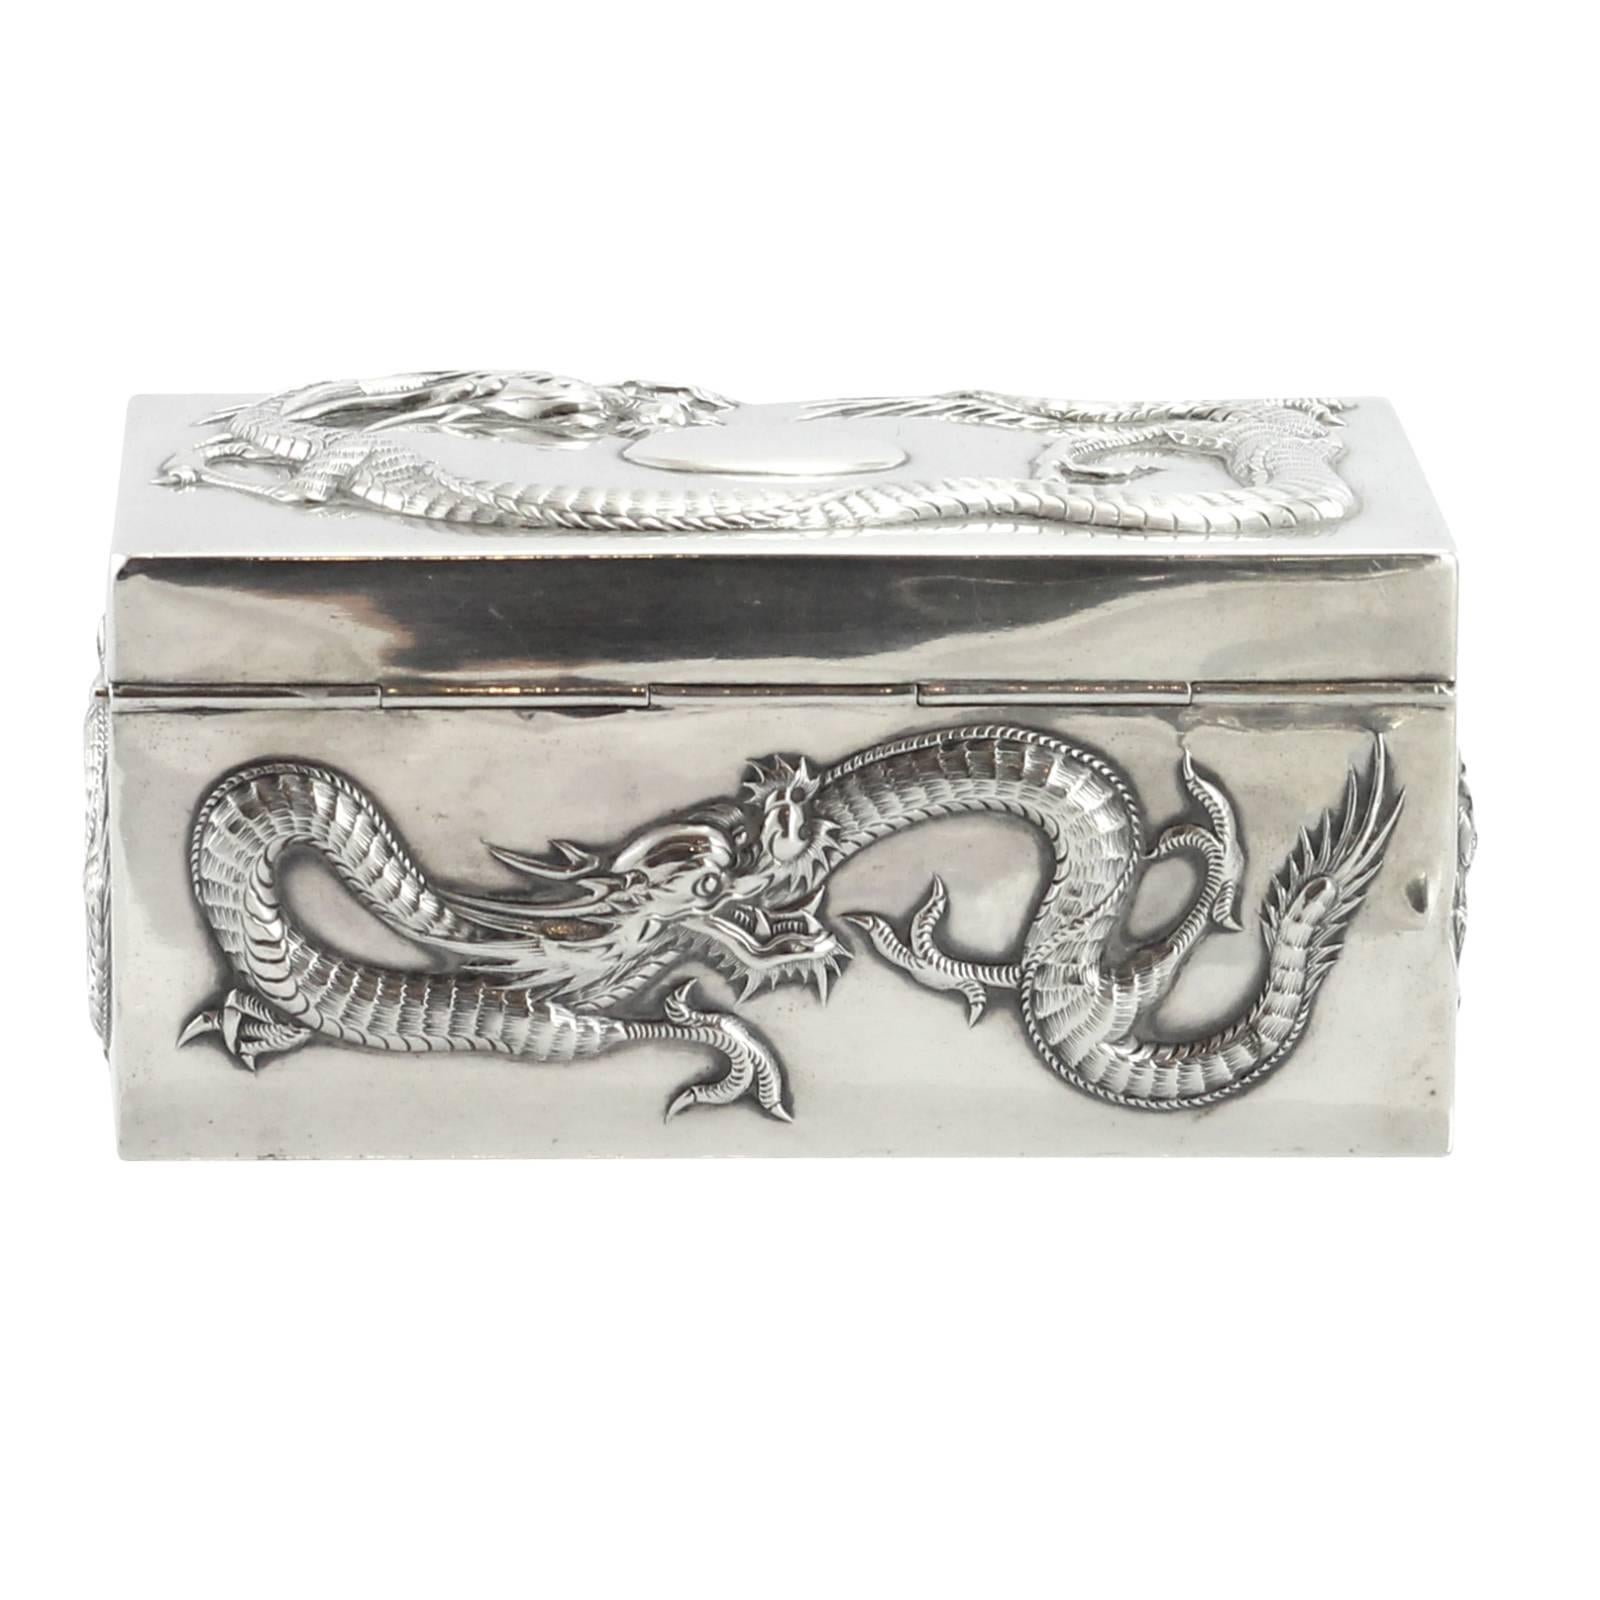 Late 19th Century Chinese Export Silver Box with Cumshing Mark 2